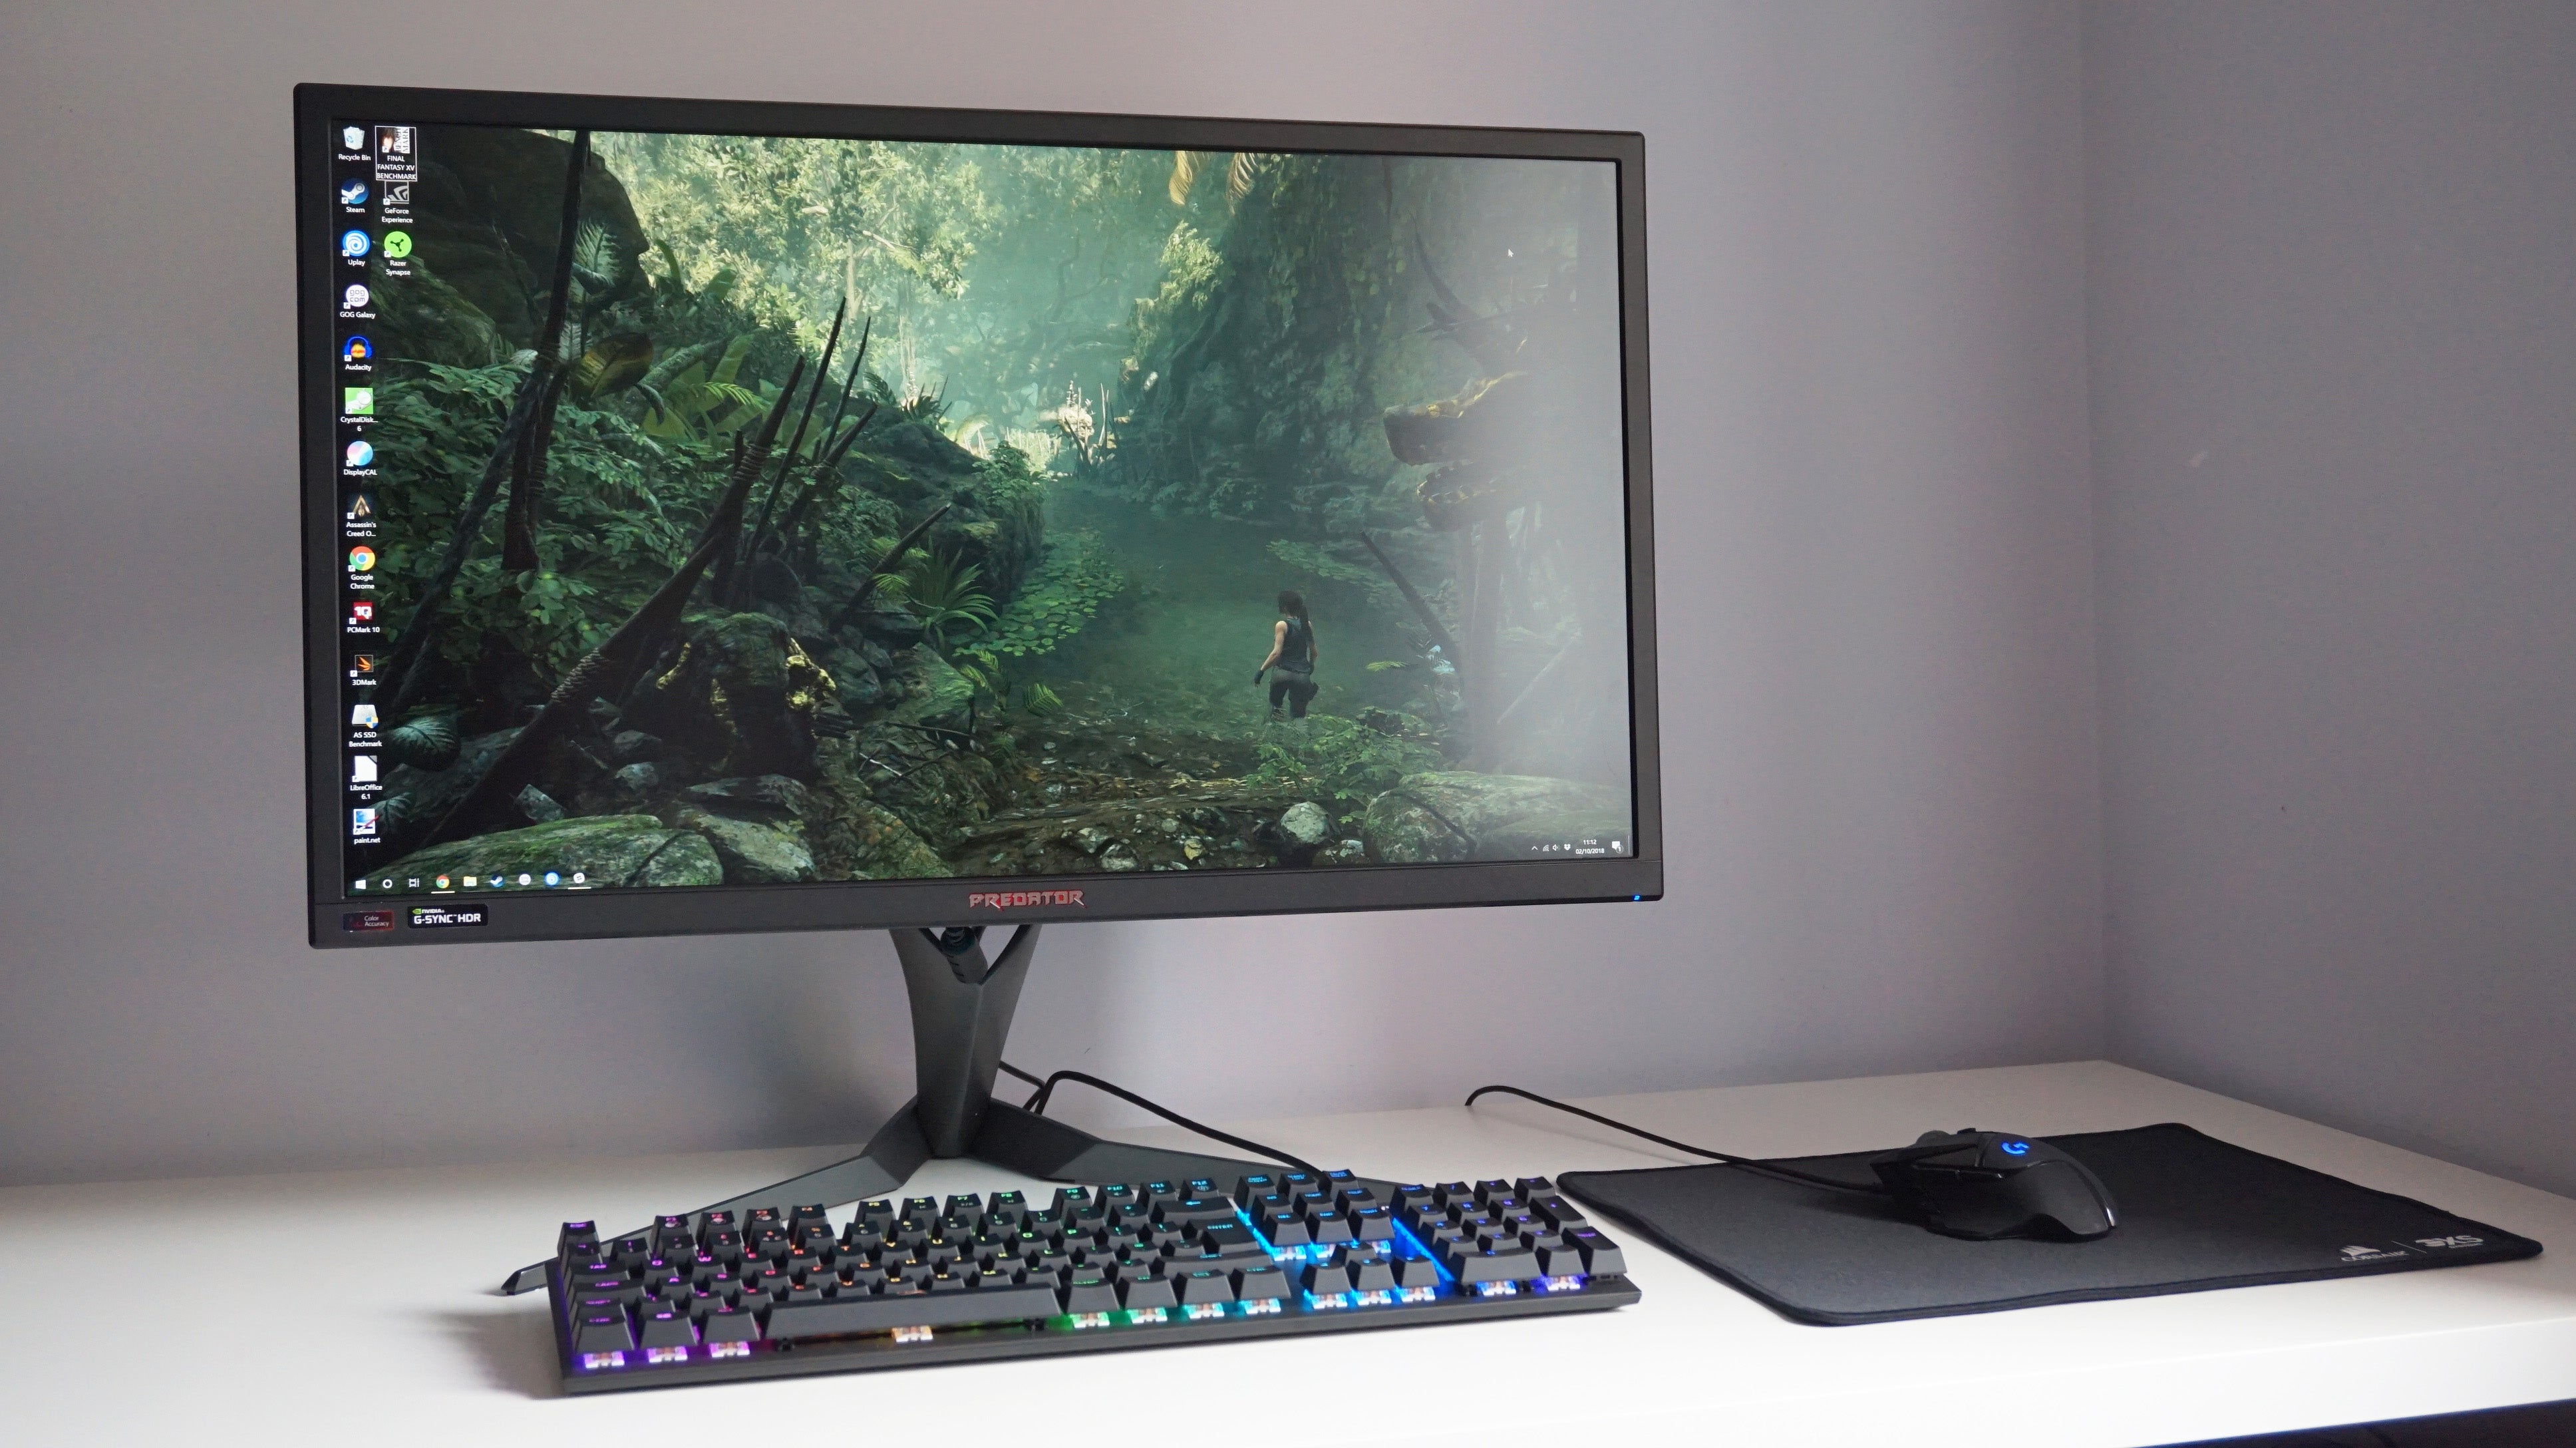 Acer Predator X27 Review The Search For Best 4k Hdr Monitor Continues Rock Paper Shotgun